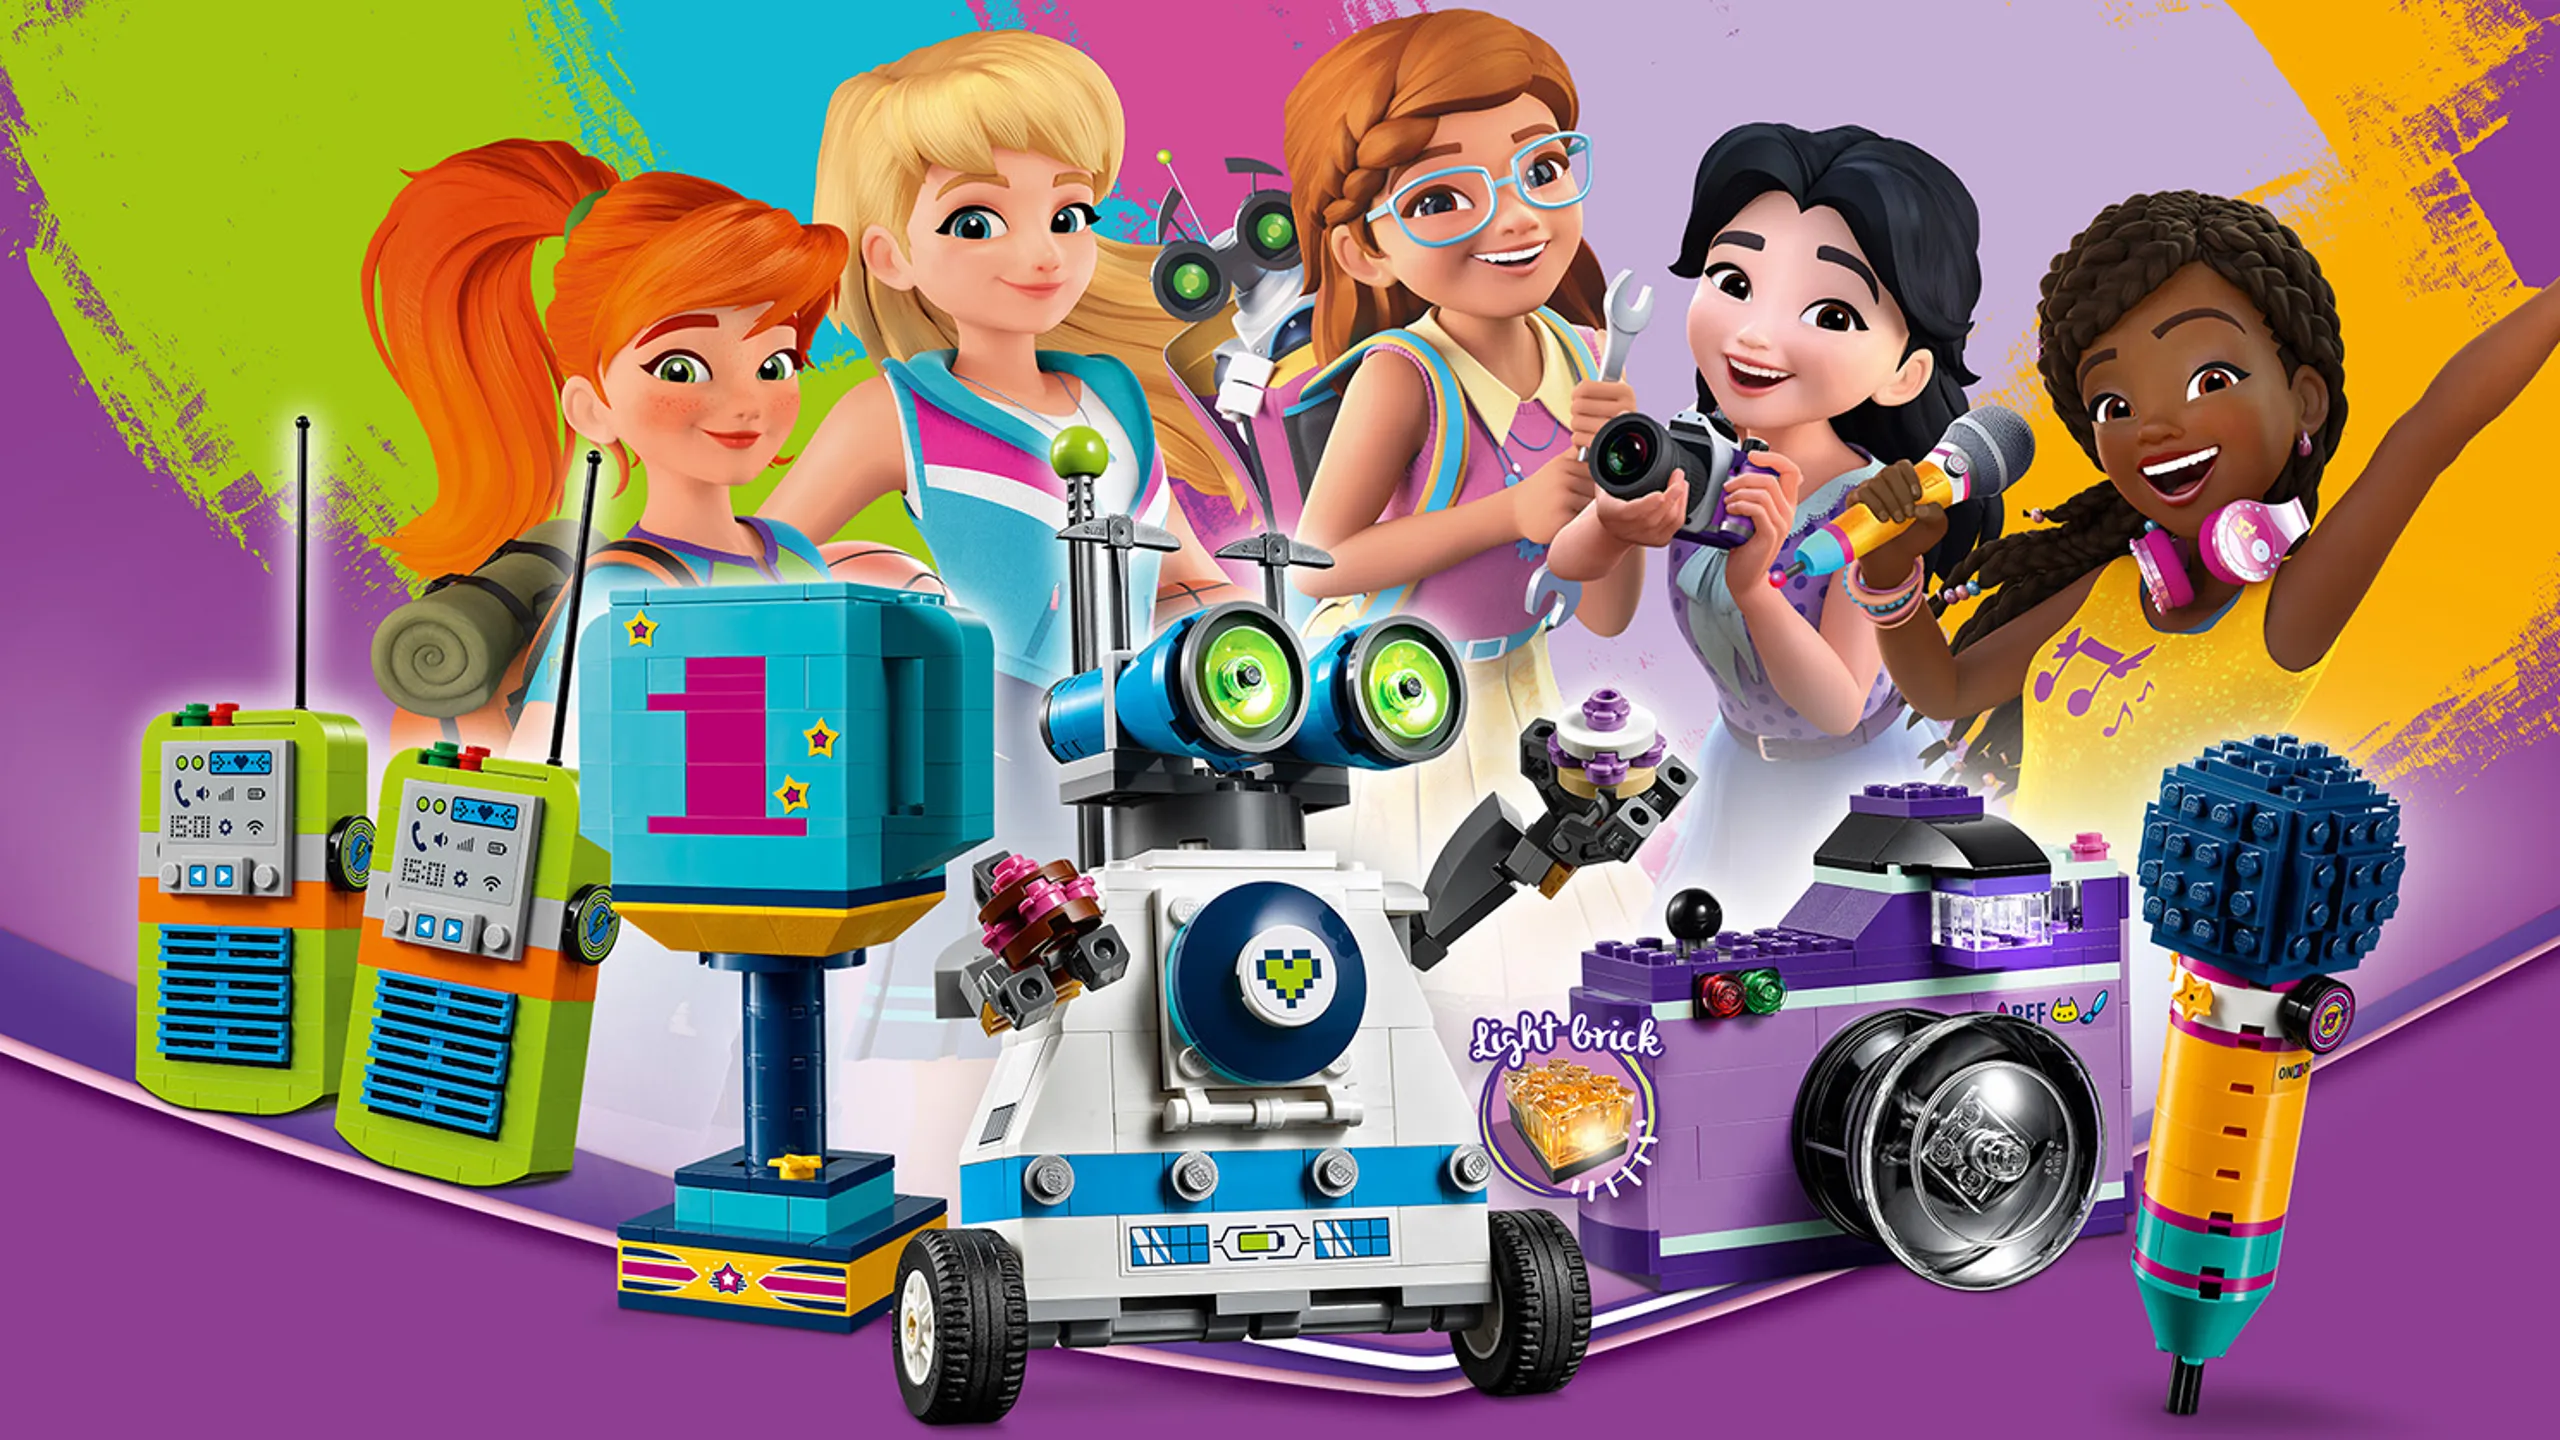 LEGO Friends - 41346 Friendship Box - Build life-sized LEGO Friends accessories: Andrea's microphone, Olivia's robot friend, Mia's walkie-talkies, Stephanie's sporting trophy and Emma's Camera.